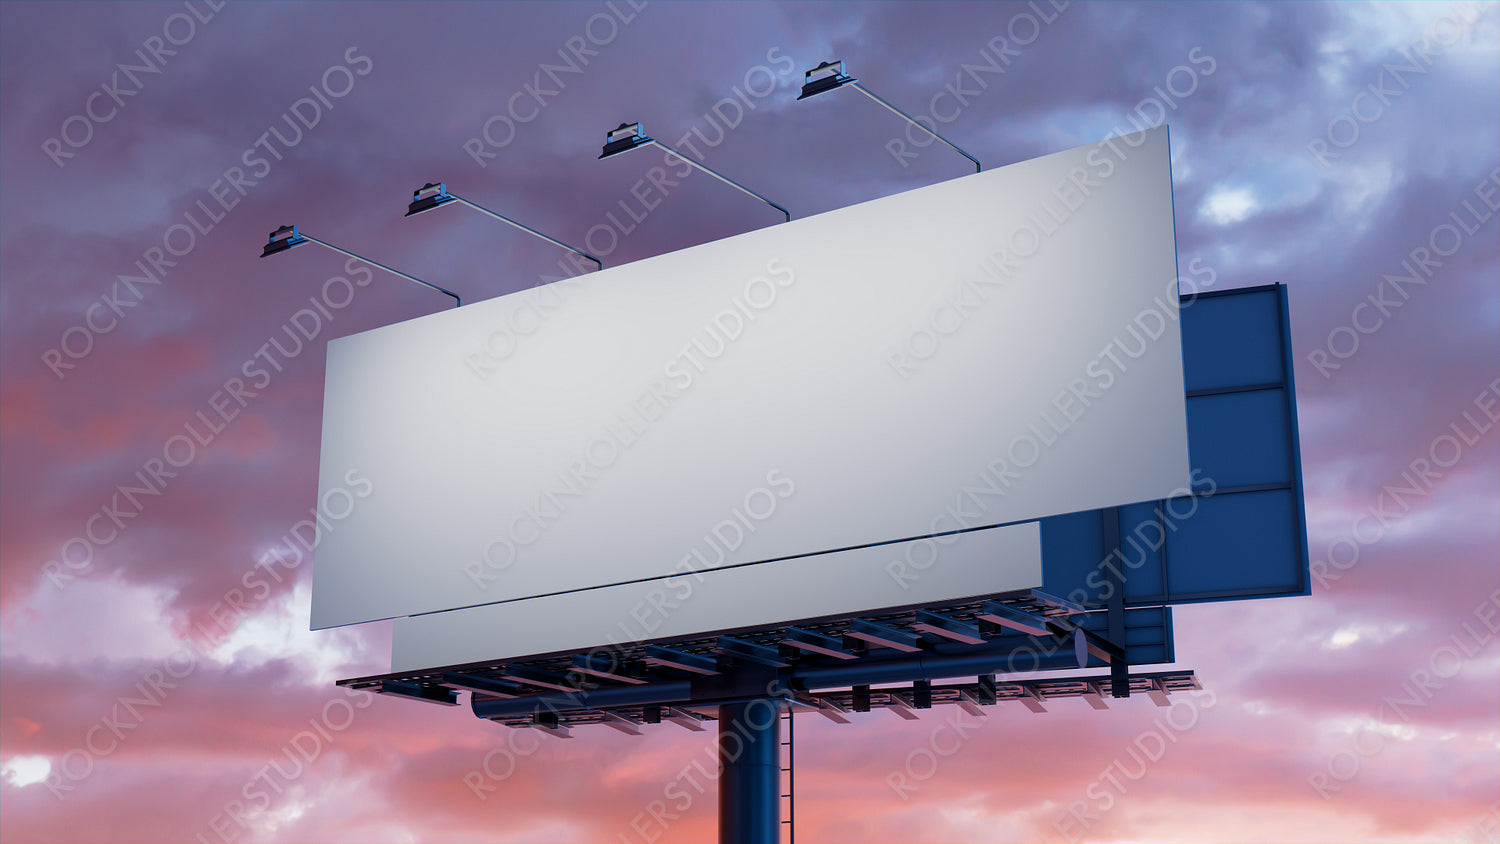 Advertising Billboard. Blank Exterior Sign against a Stormy Evening Sky. Design Template.